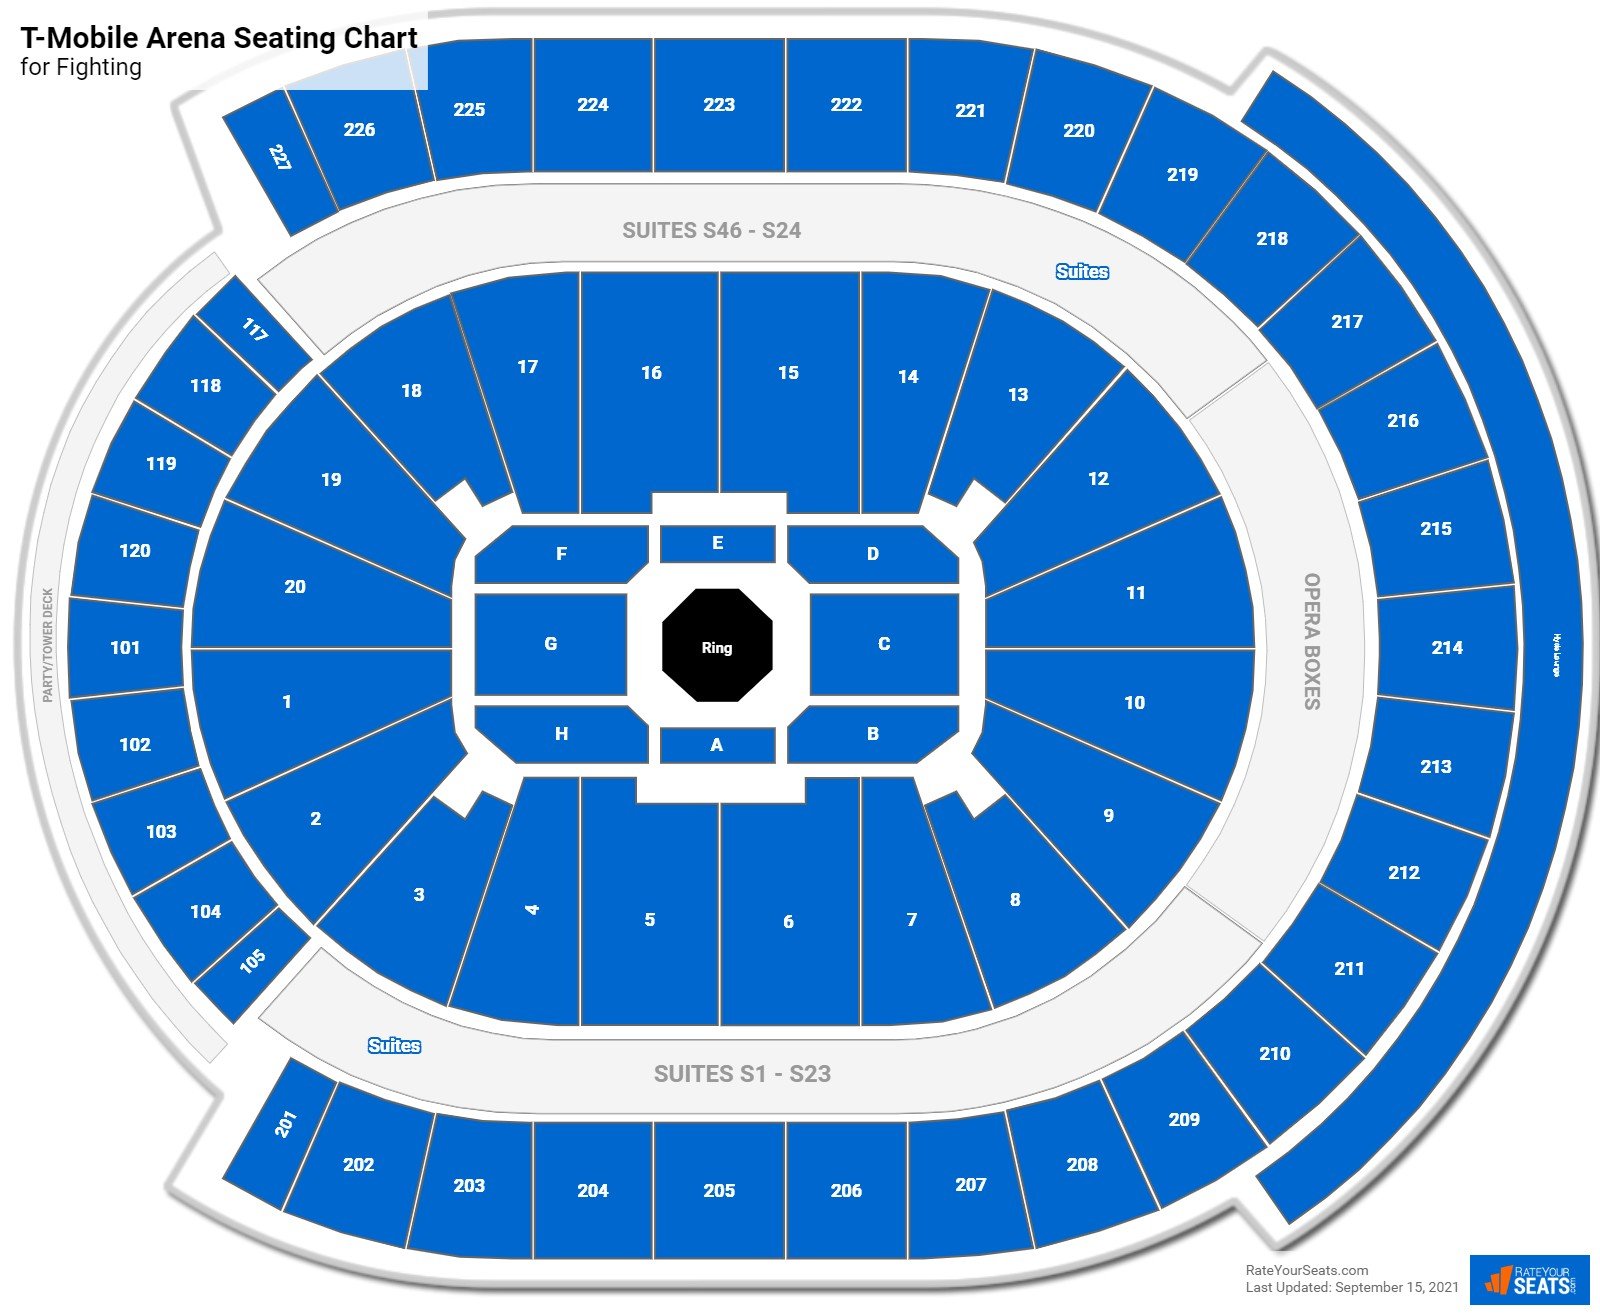 Breakdown Of The T-Mobile Arena Seating Chart